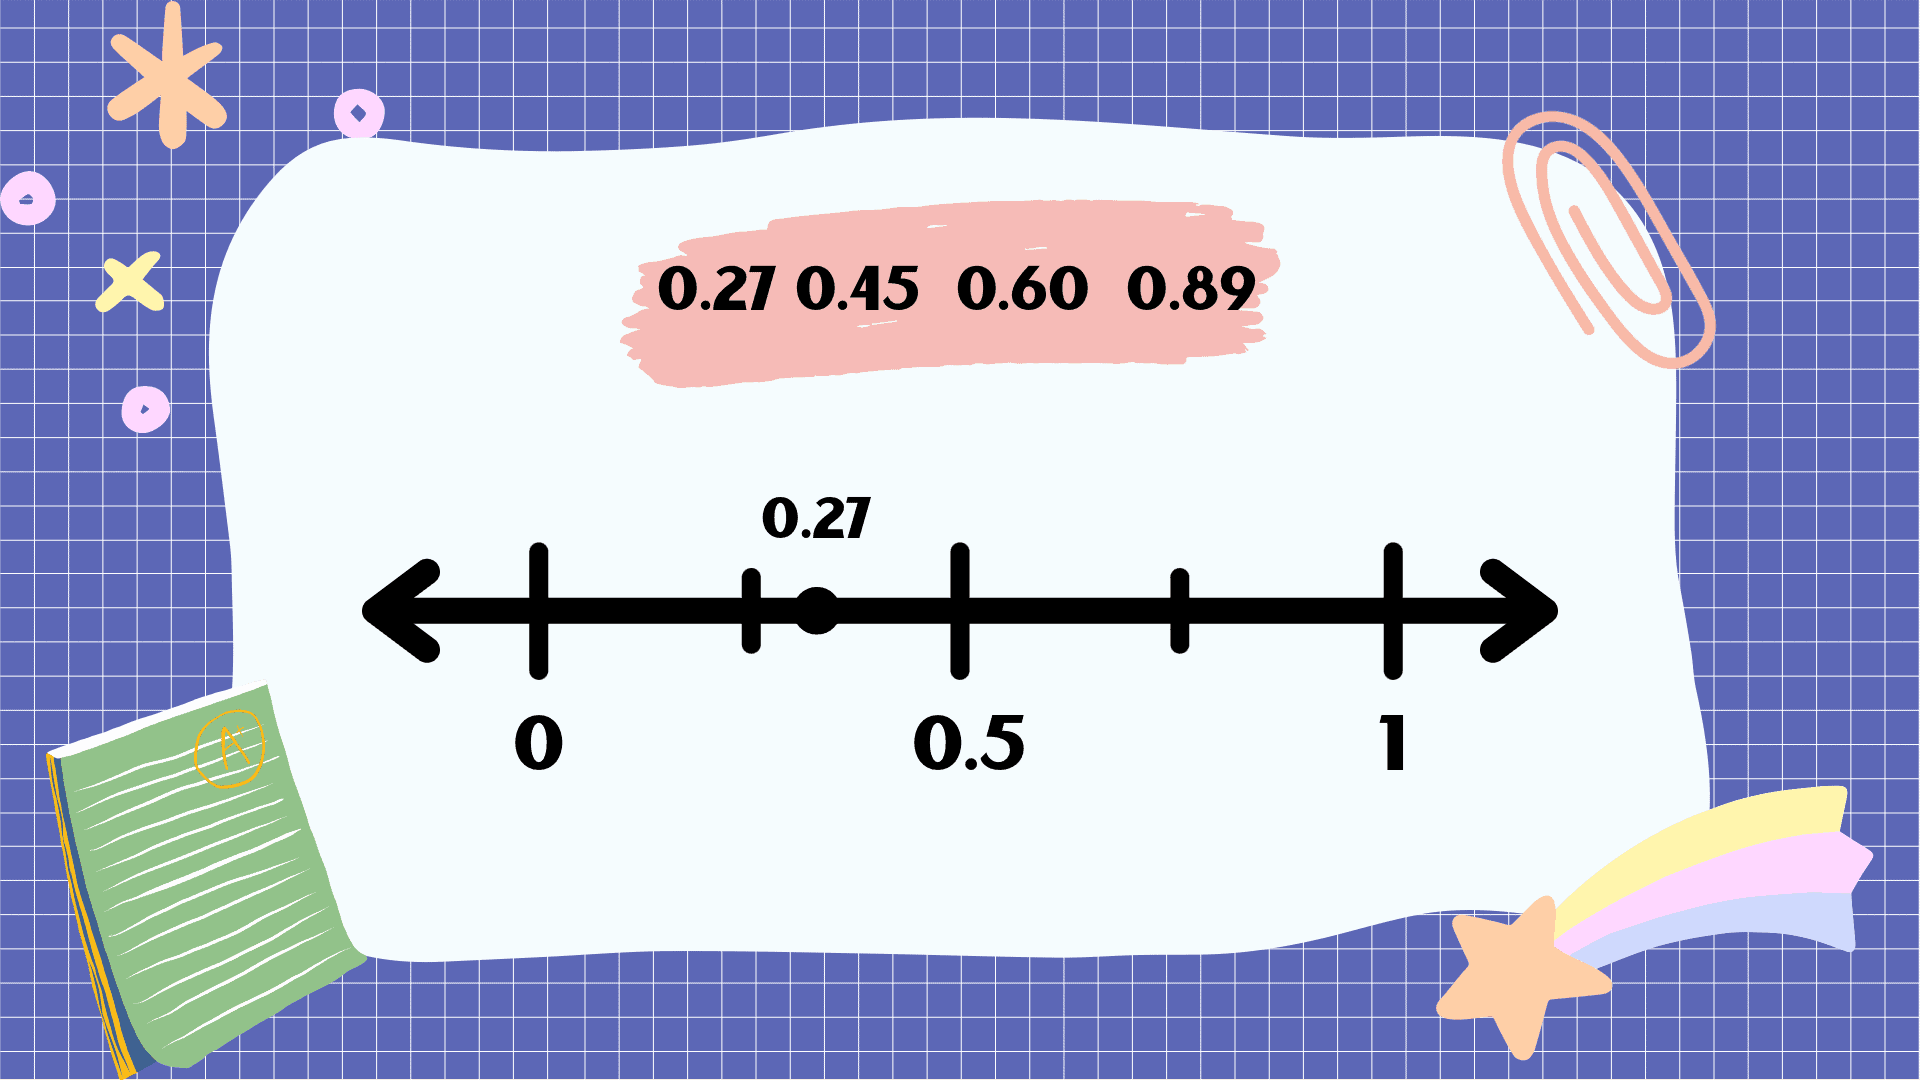 A Harder Version with Lesser Options in the Number Line